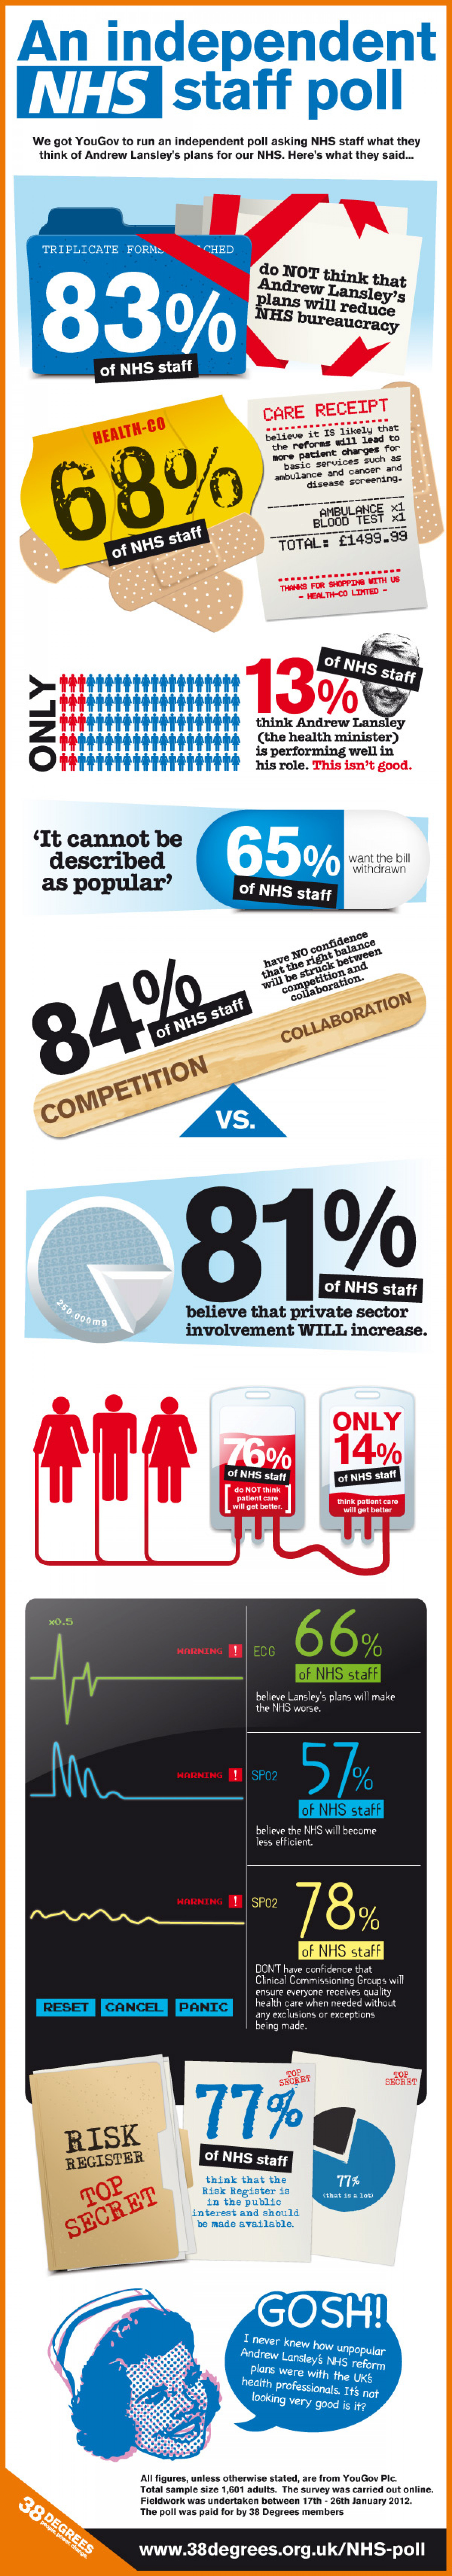 An Independent NHS Staff Poll Infographic